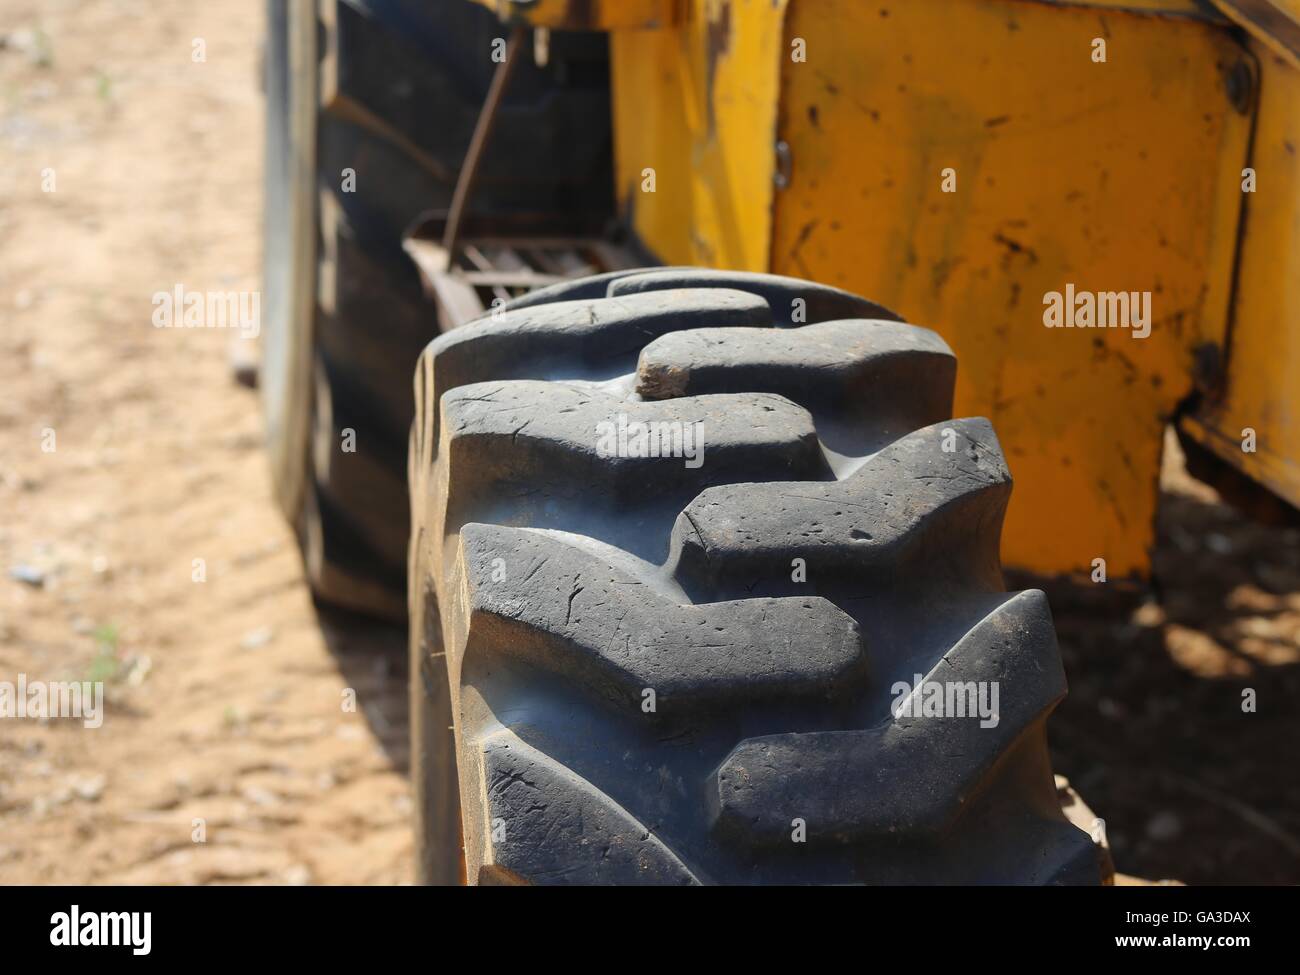 Loader Tire Stock Photo